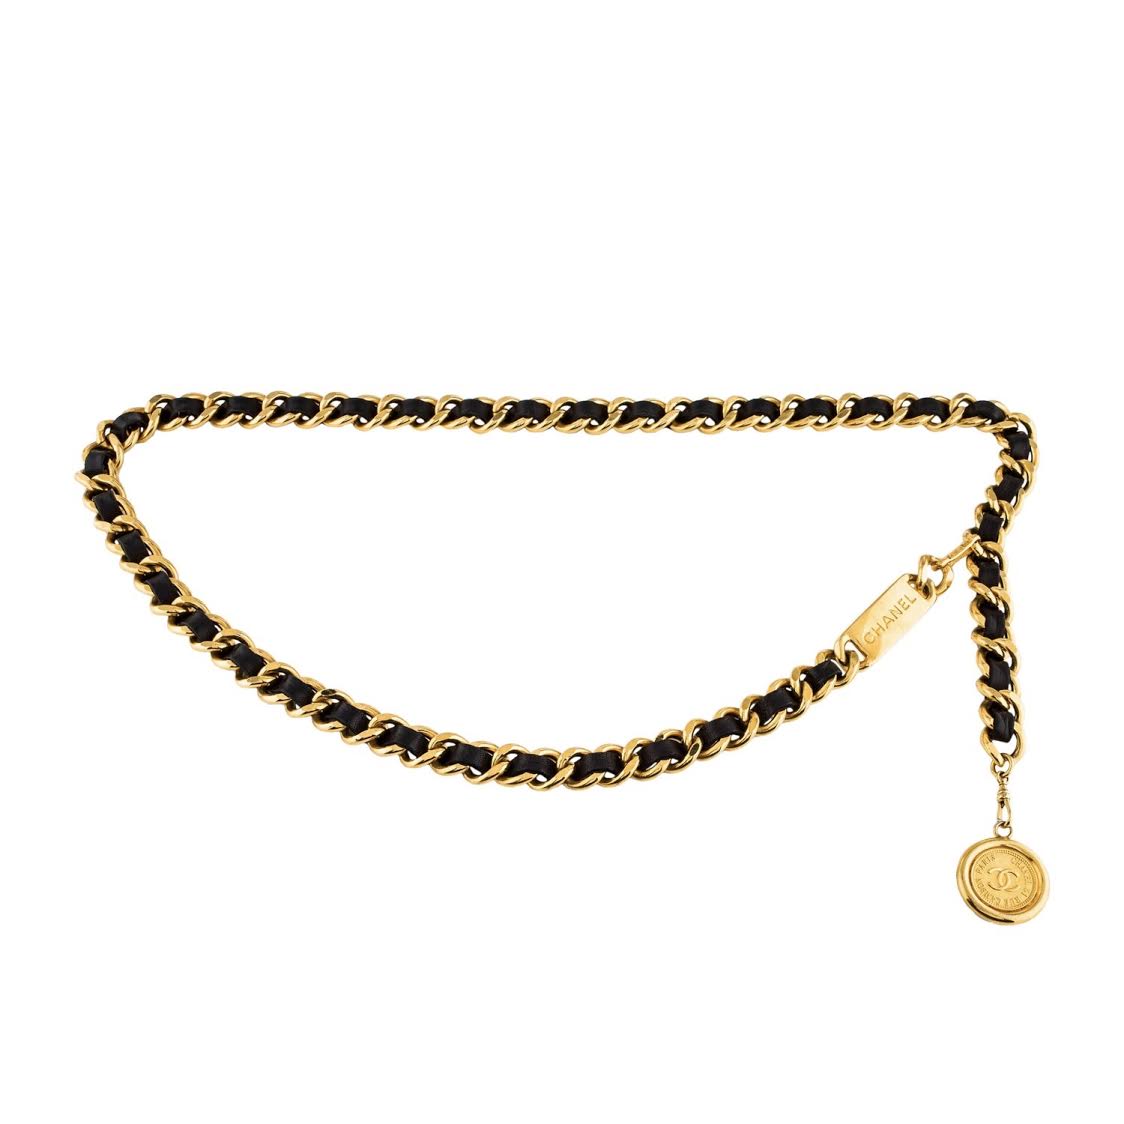 Chanel Chain Strap - 1,463 For Sale on 1stDibs